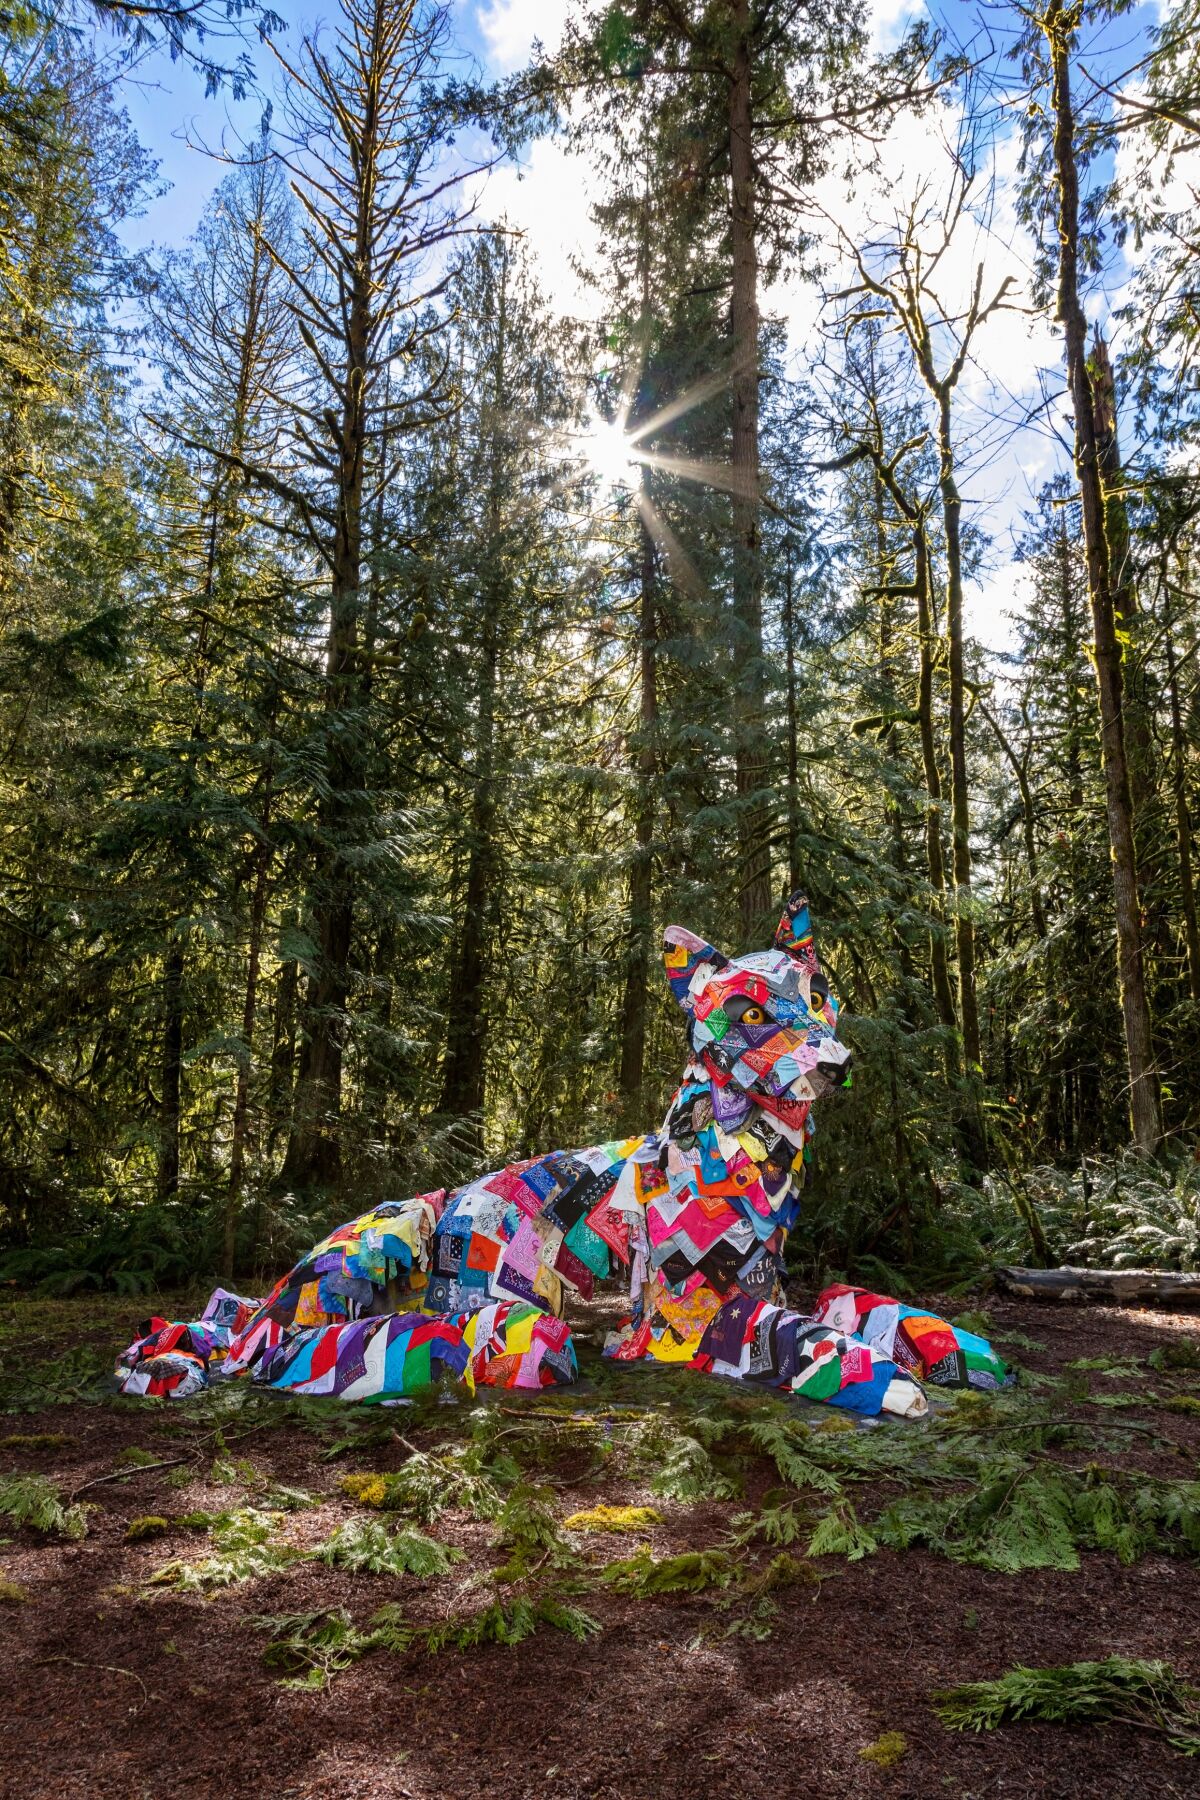  A sculpture of a canine crafted from hundreds of bandanas is shown in a forest, surrounded by tall trees